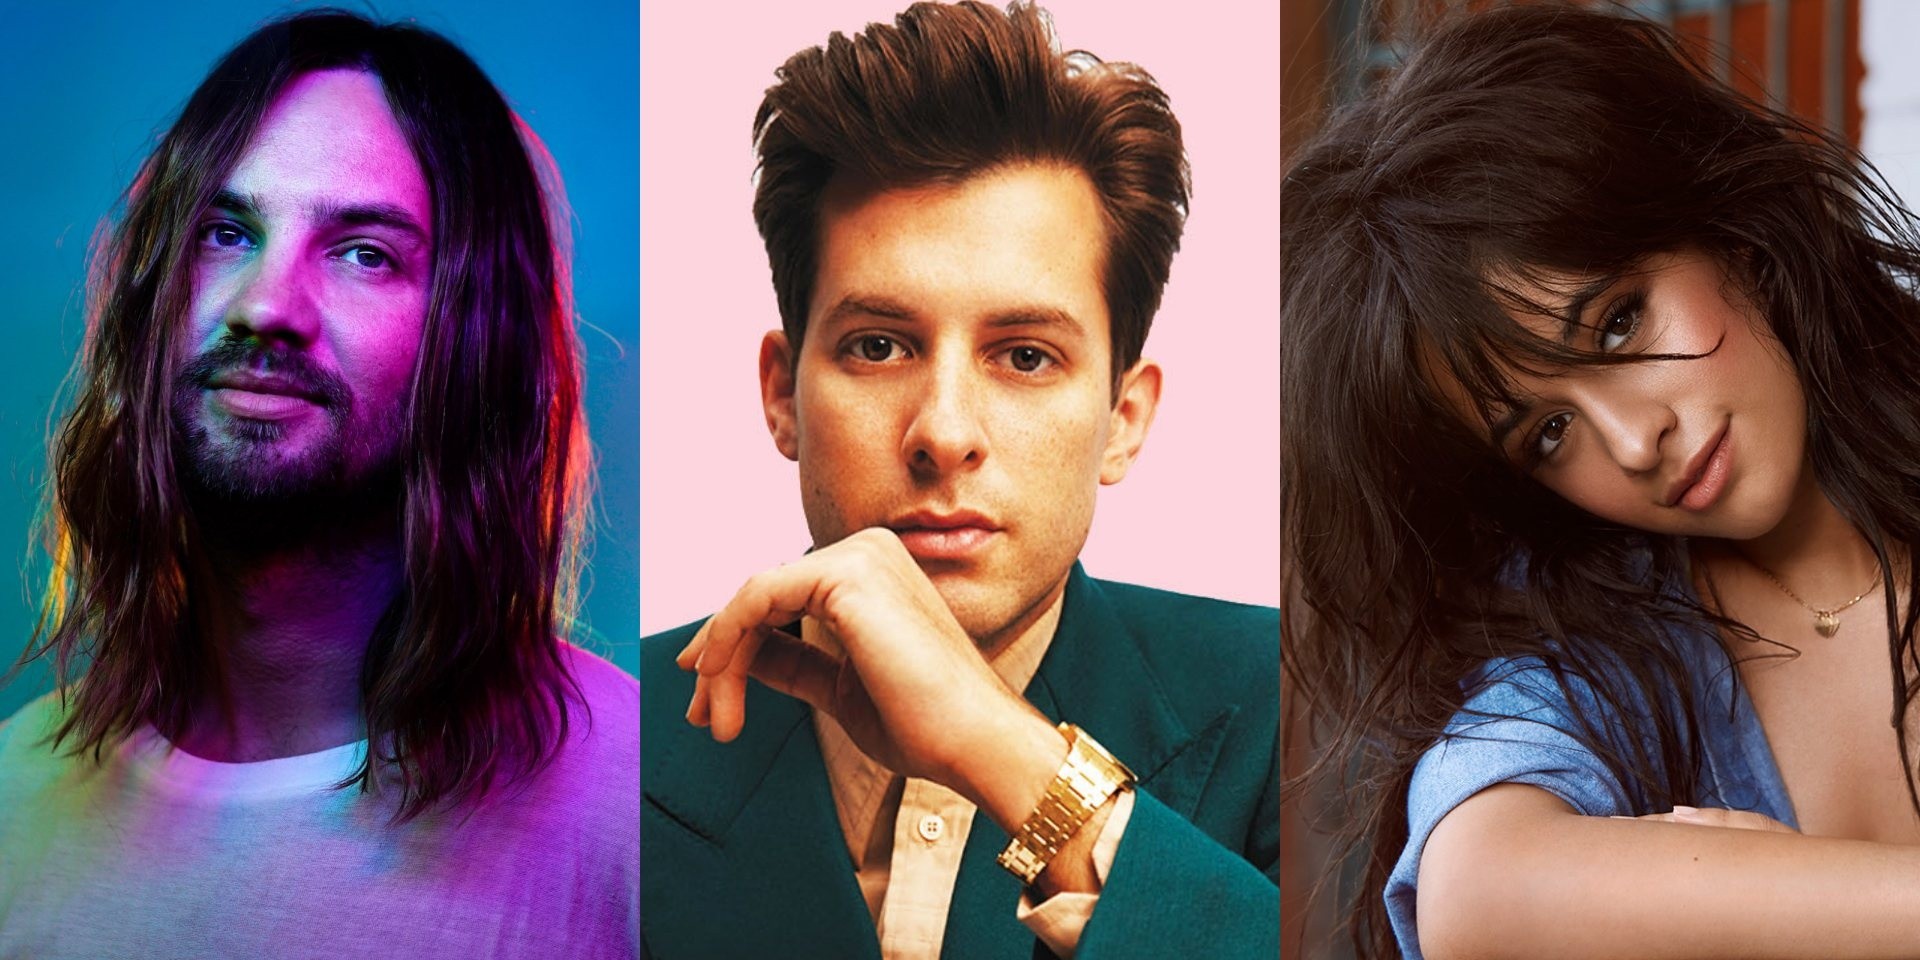 Mark Ronson releases new song 'Find U Again feat. Camila Cabello', co-written by Tame Impala's Kevin Parker – listen